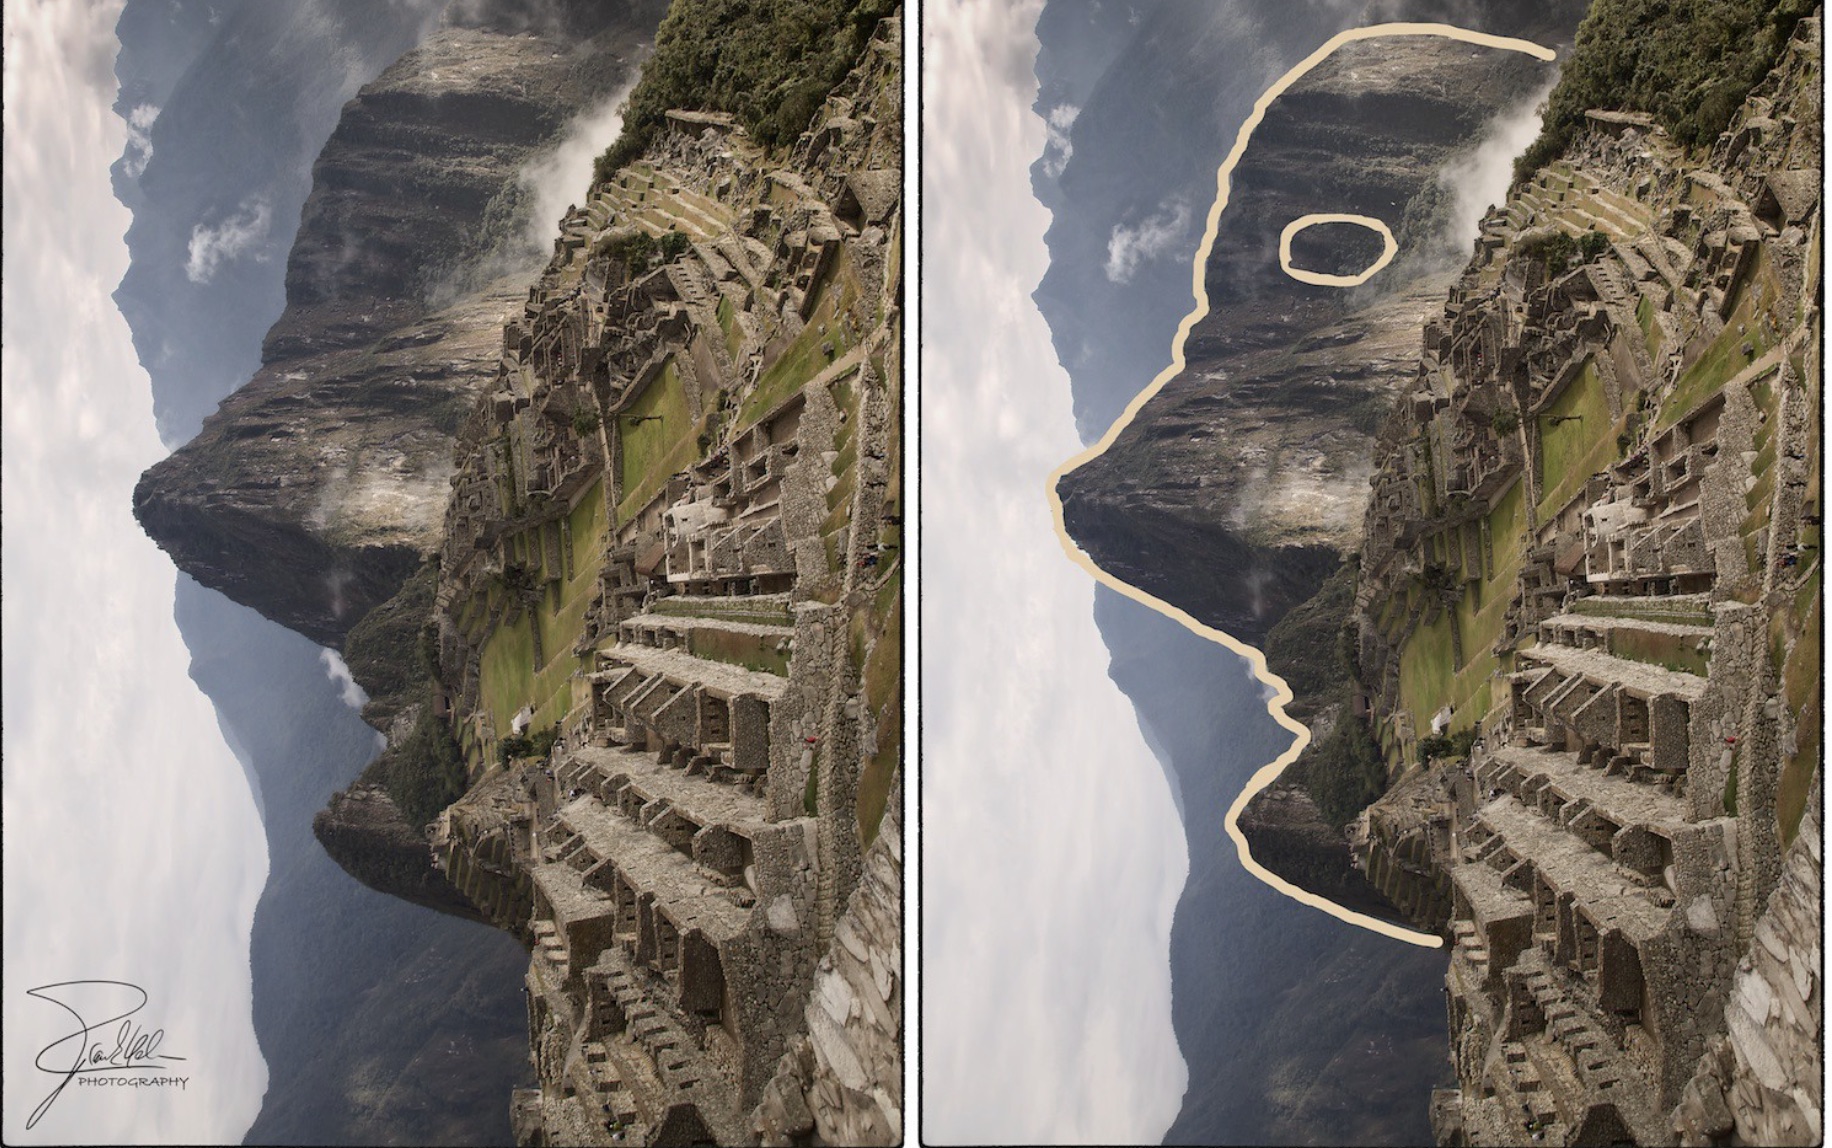 An photograph showing the Face of the Inca at Machu Picchu. Credit: Frank Kehren.